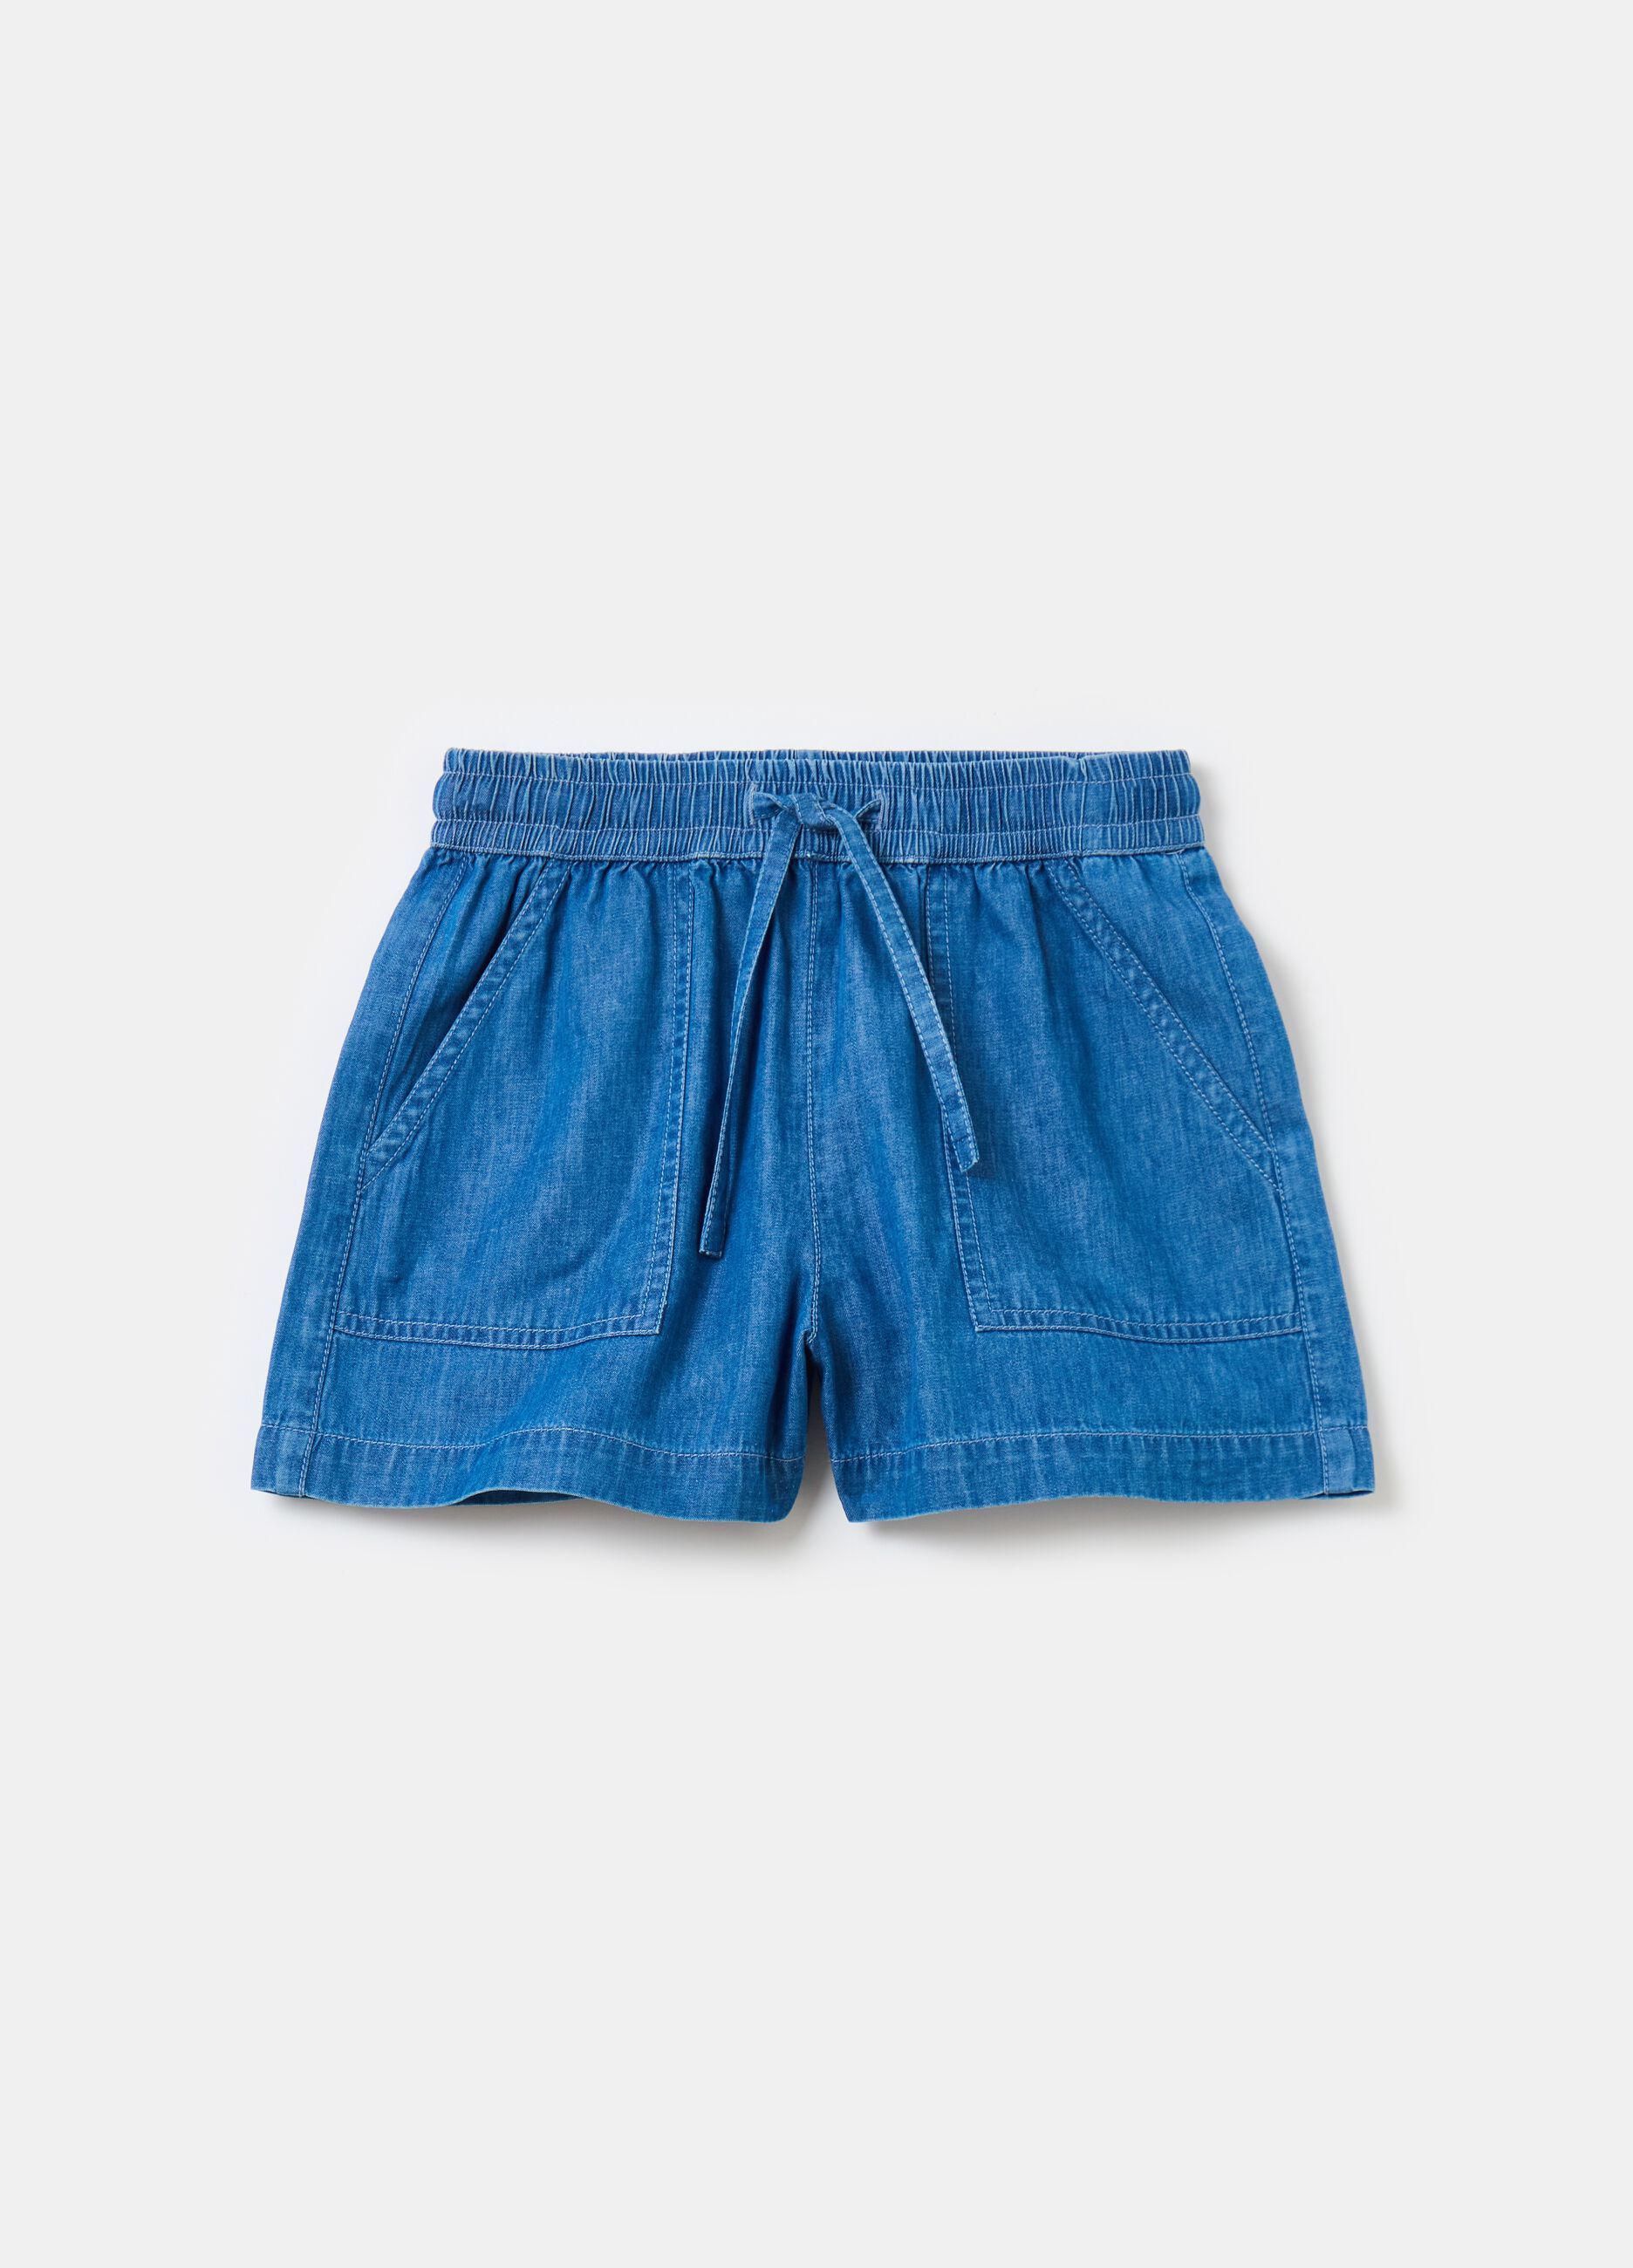 Shorts fluido in denim con coulisse